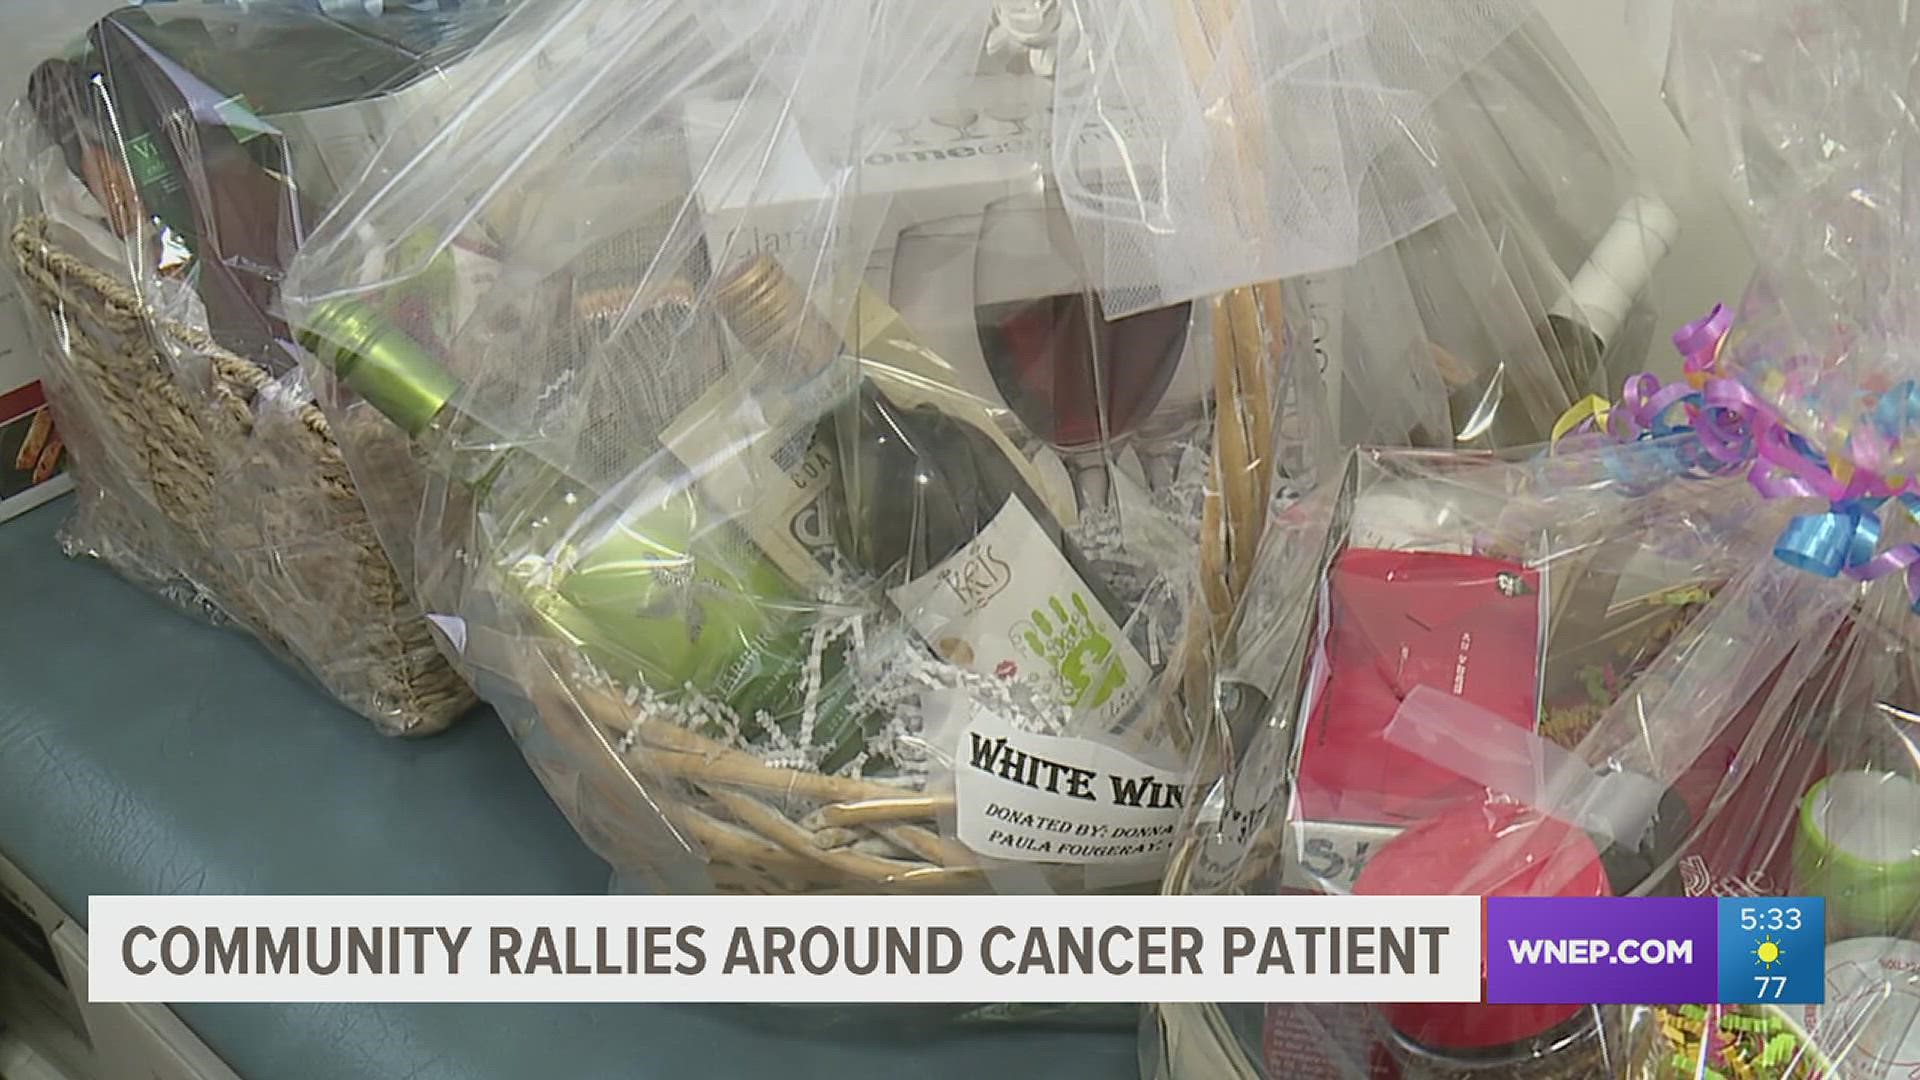 A pharmacy in Scranton is seeing the power of community after one of its employees was diagnosed with cancer.